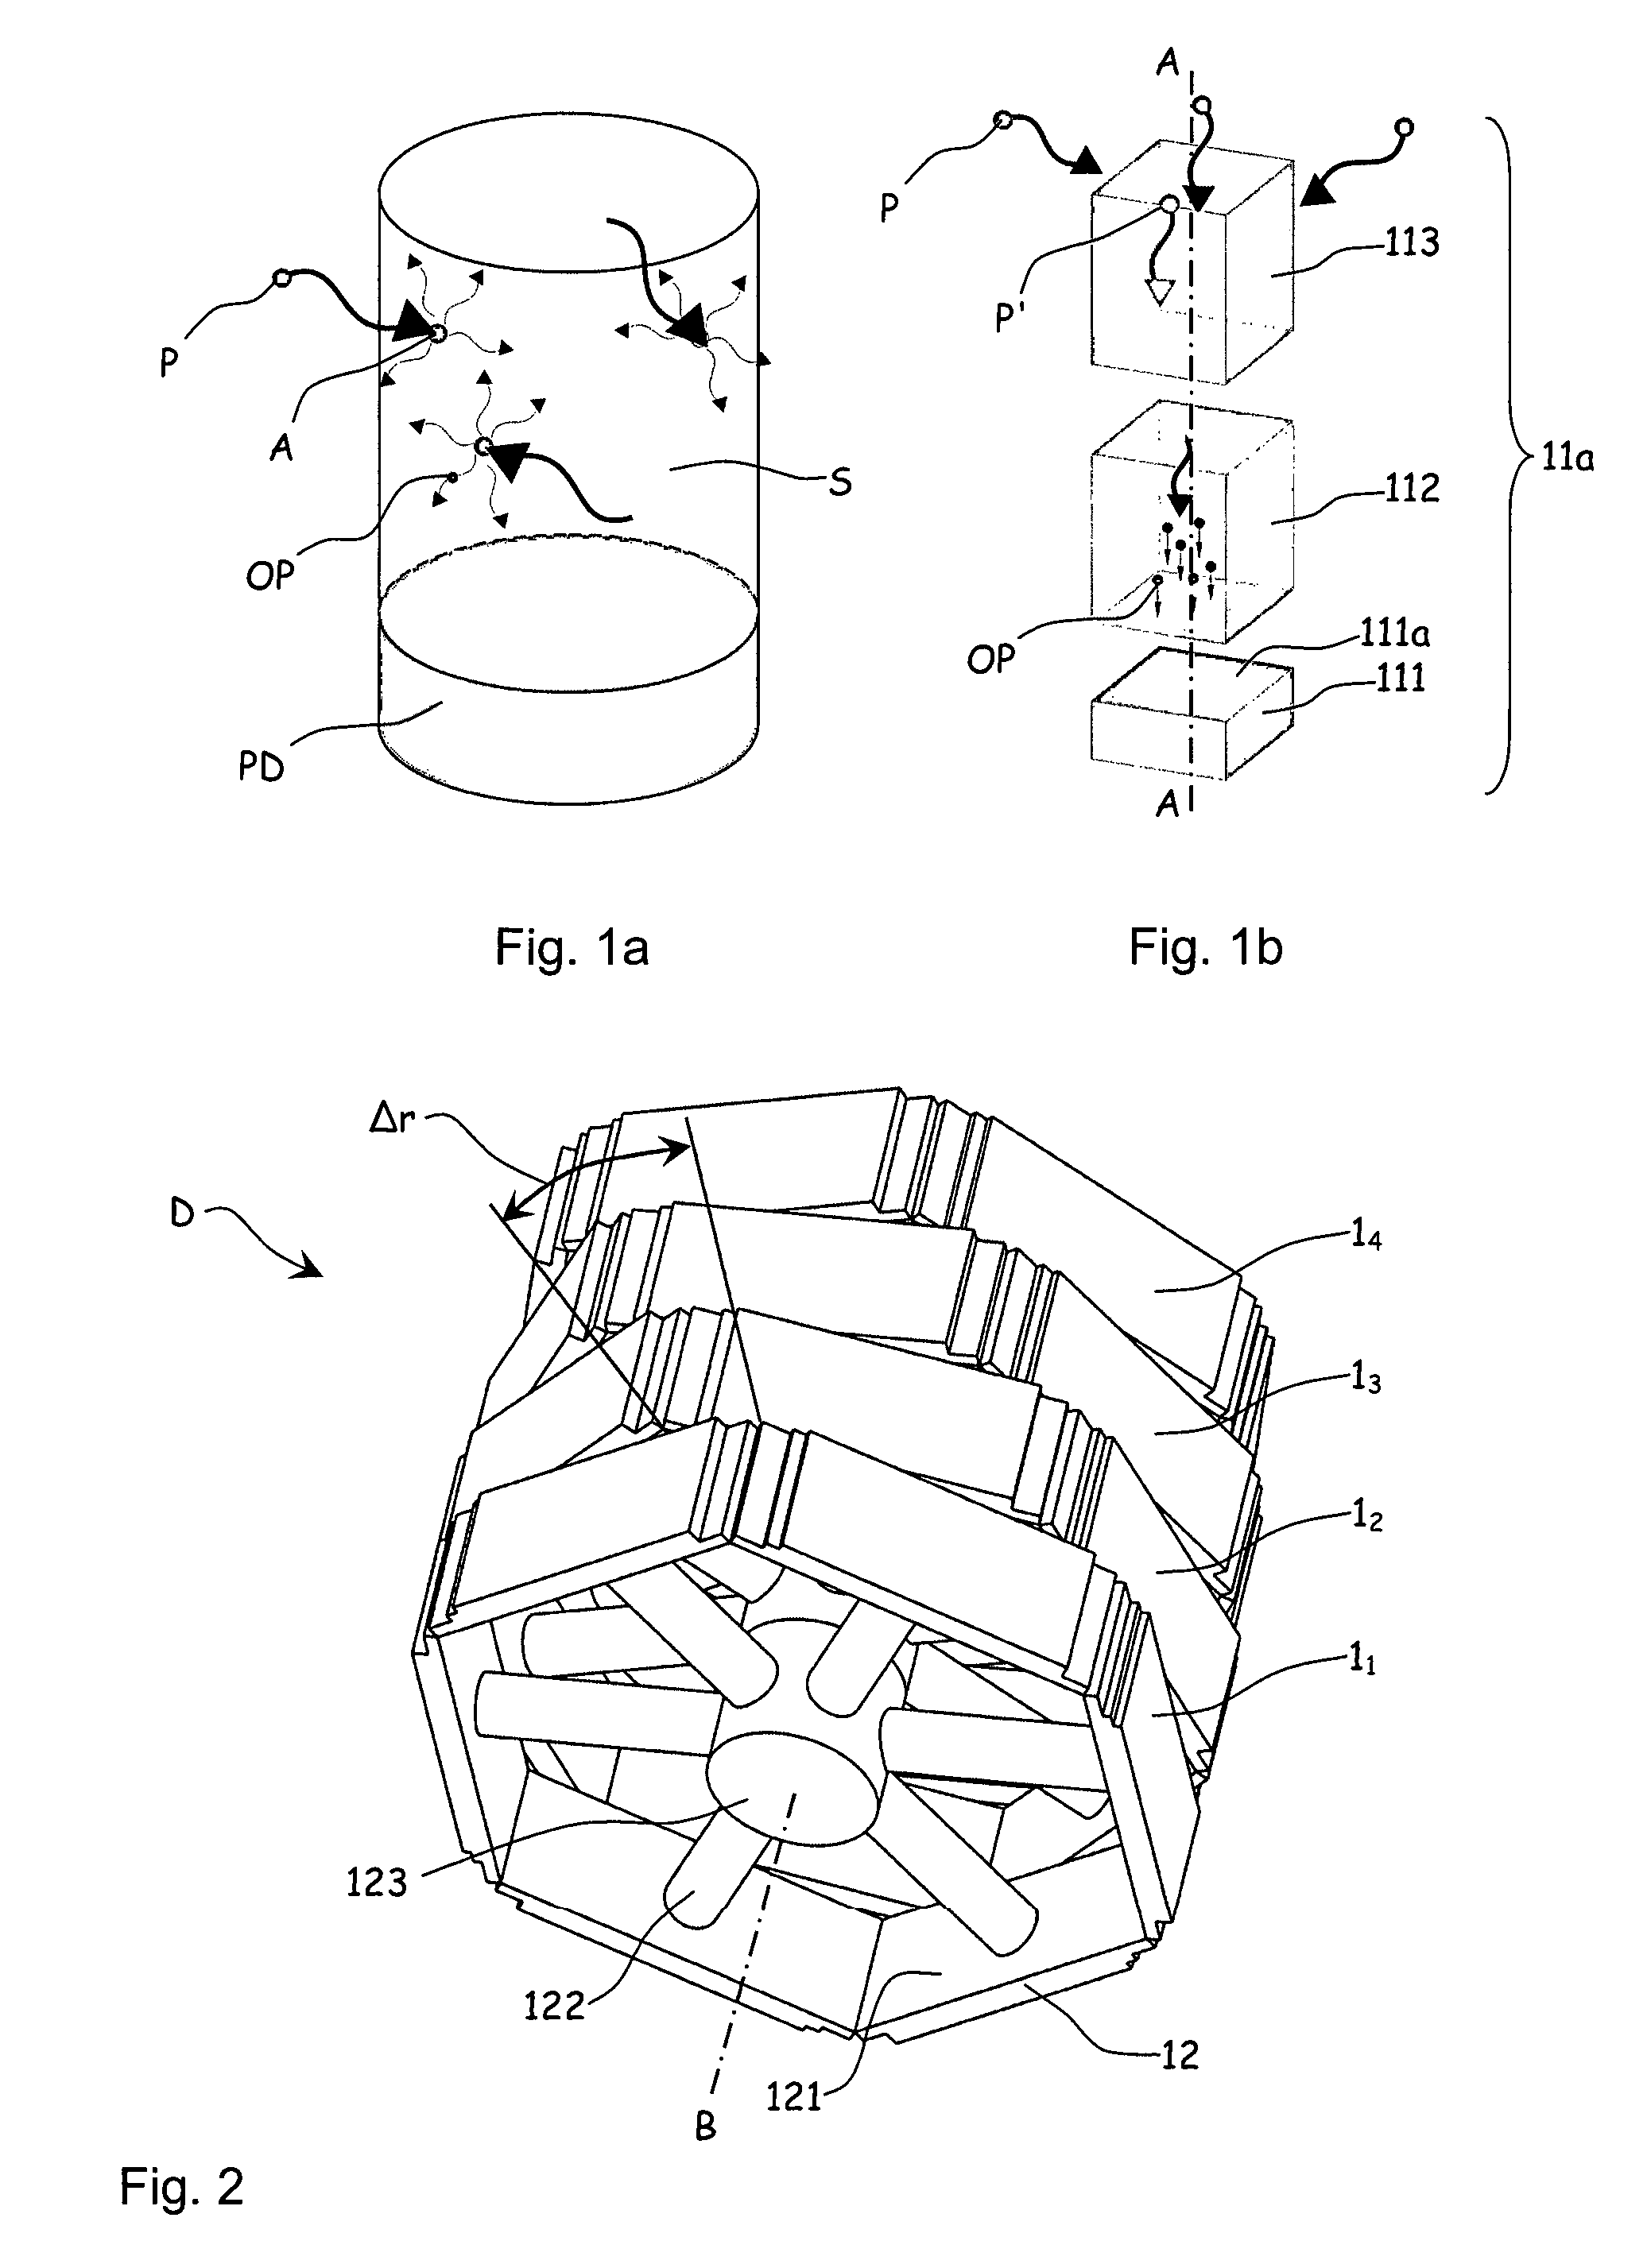 Apparatus for registration of photons and ionizing particles with simultaneous directional definition, for each photon or ionizing particle, of a point of origin in a fluid-filled conduit